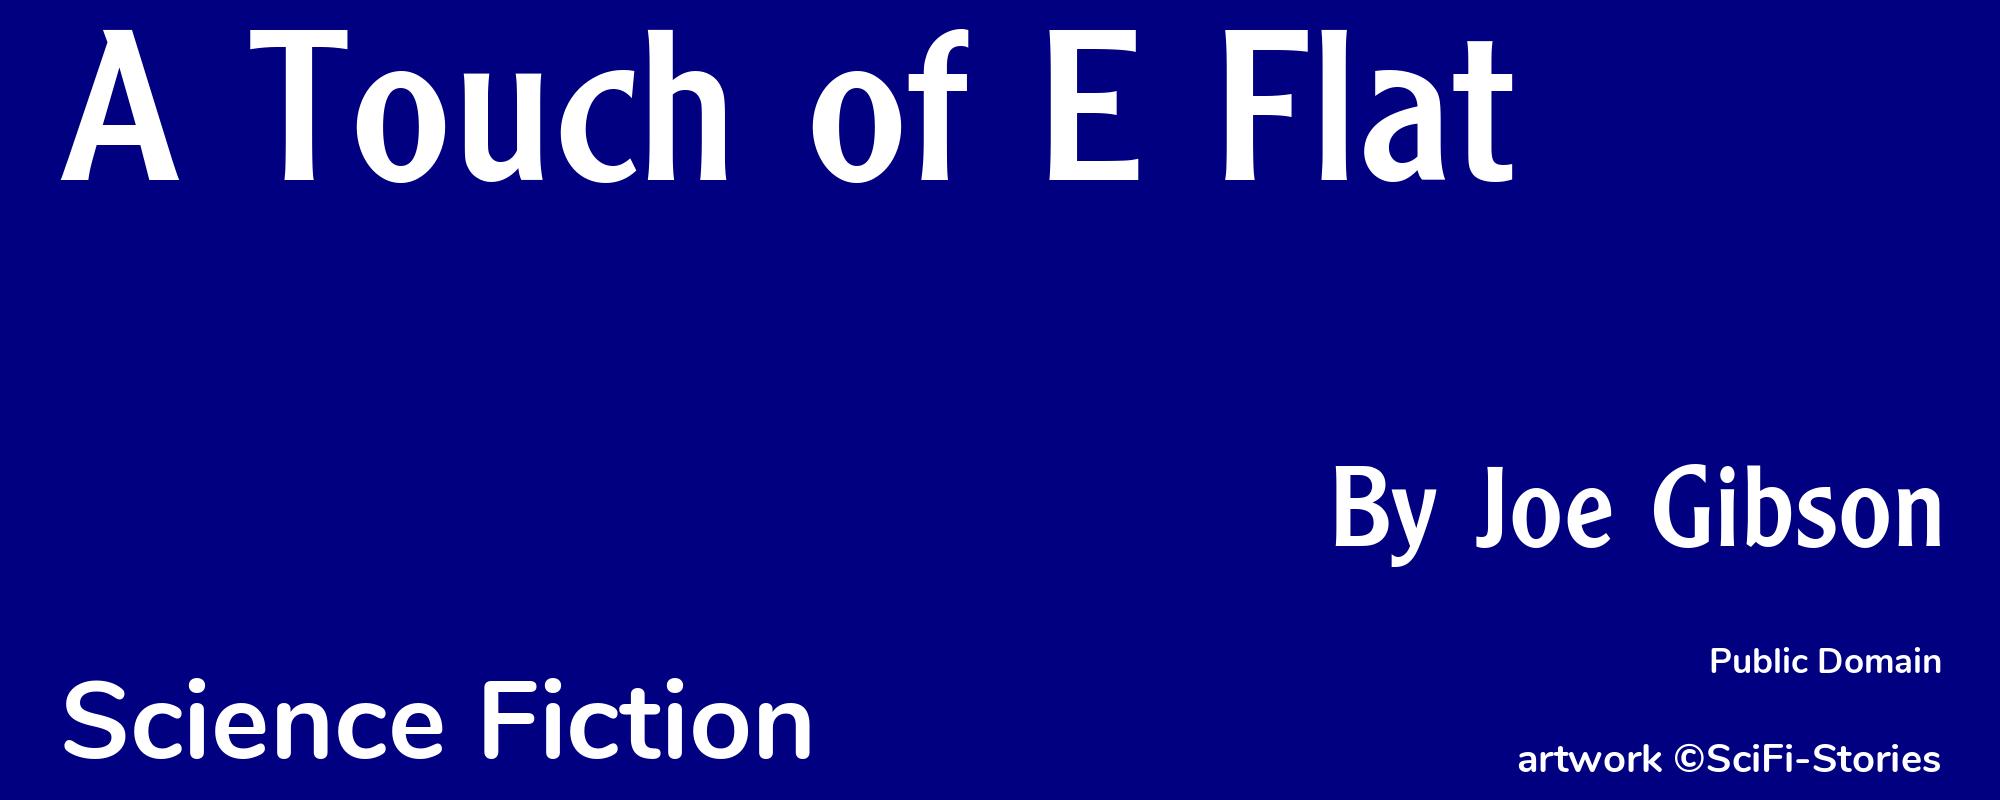 A Touch of E Flat - Cover